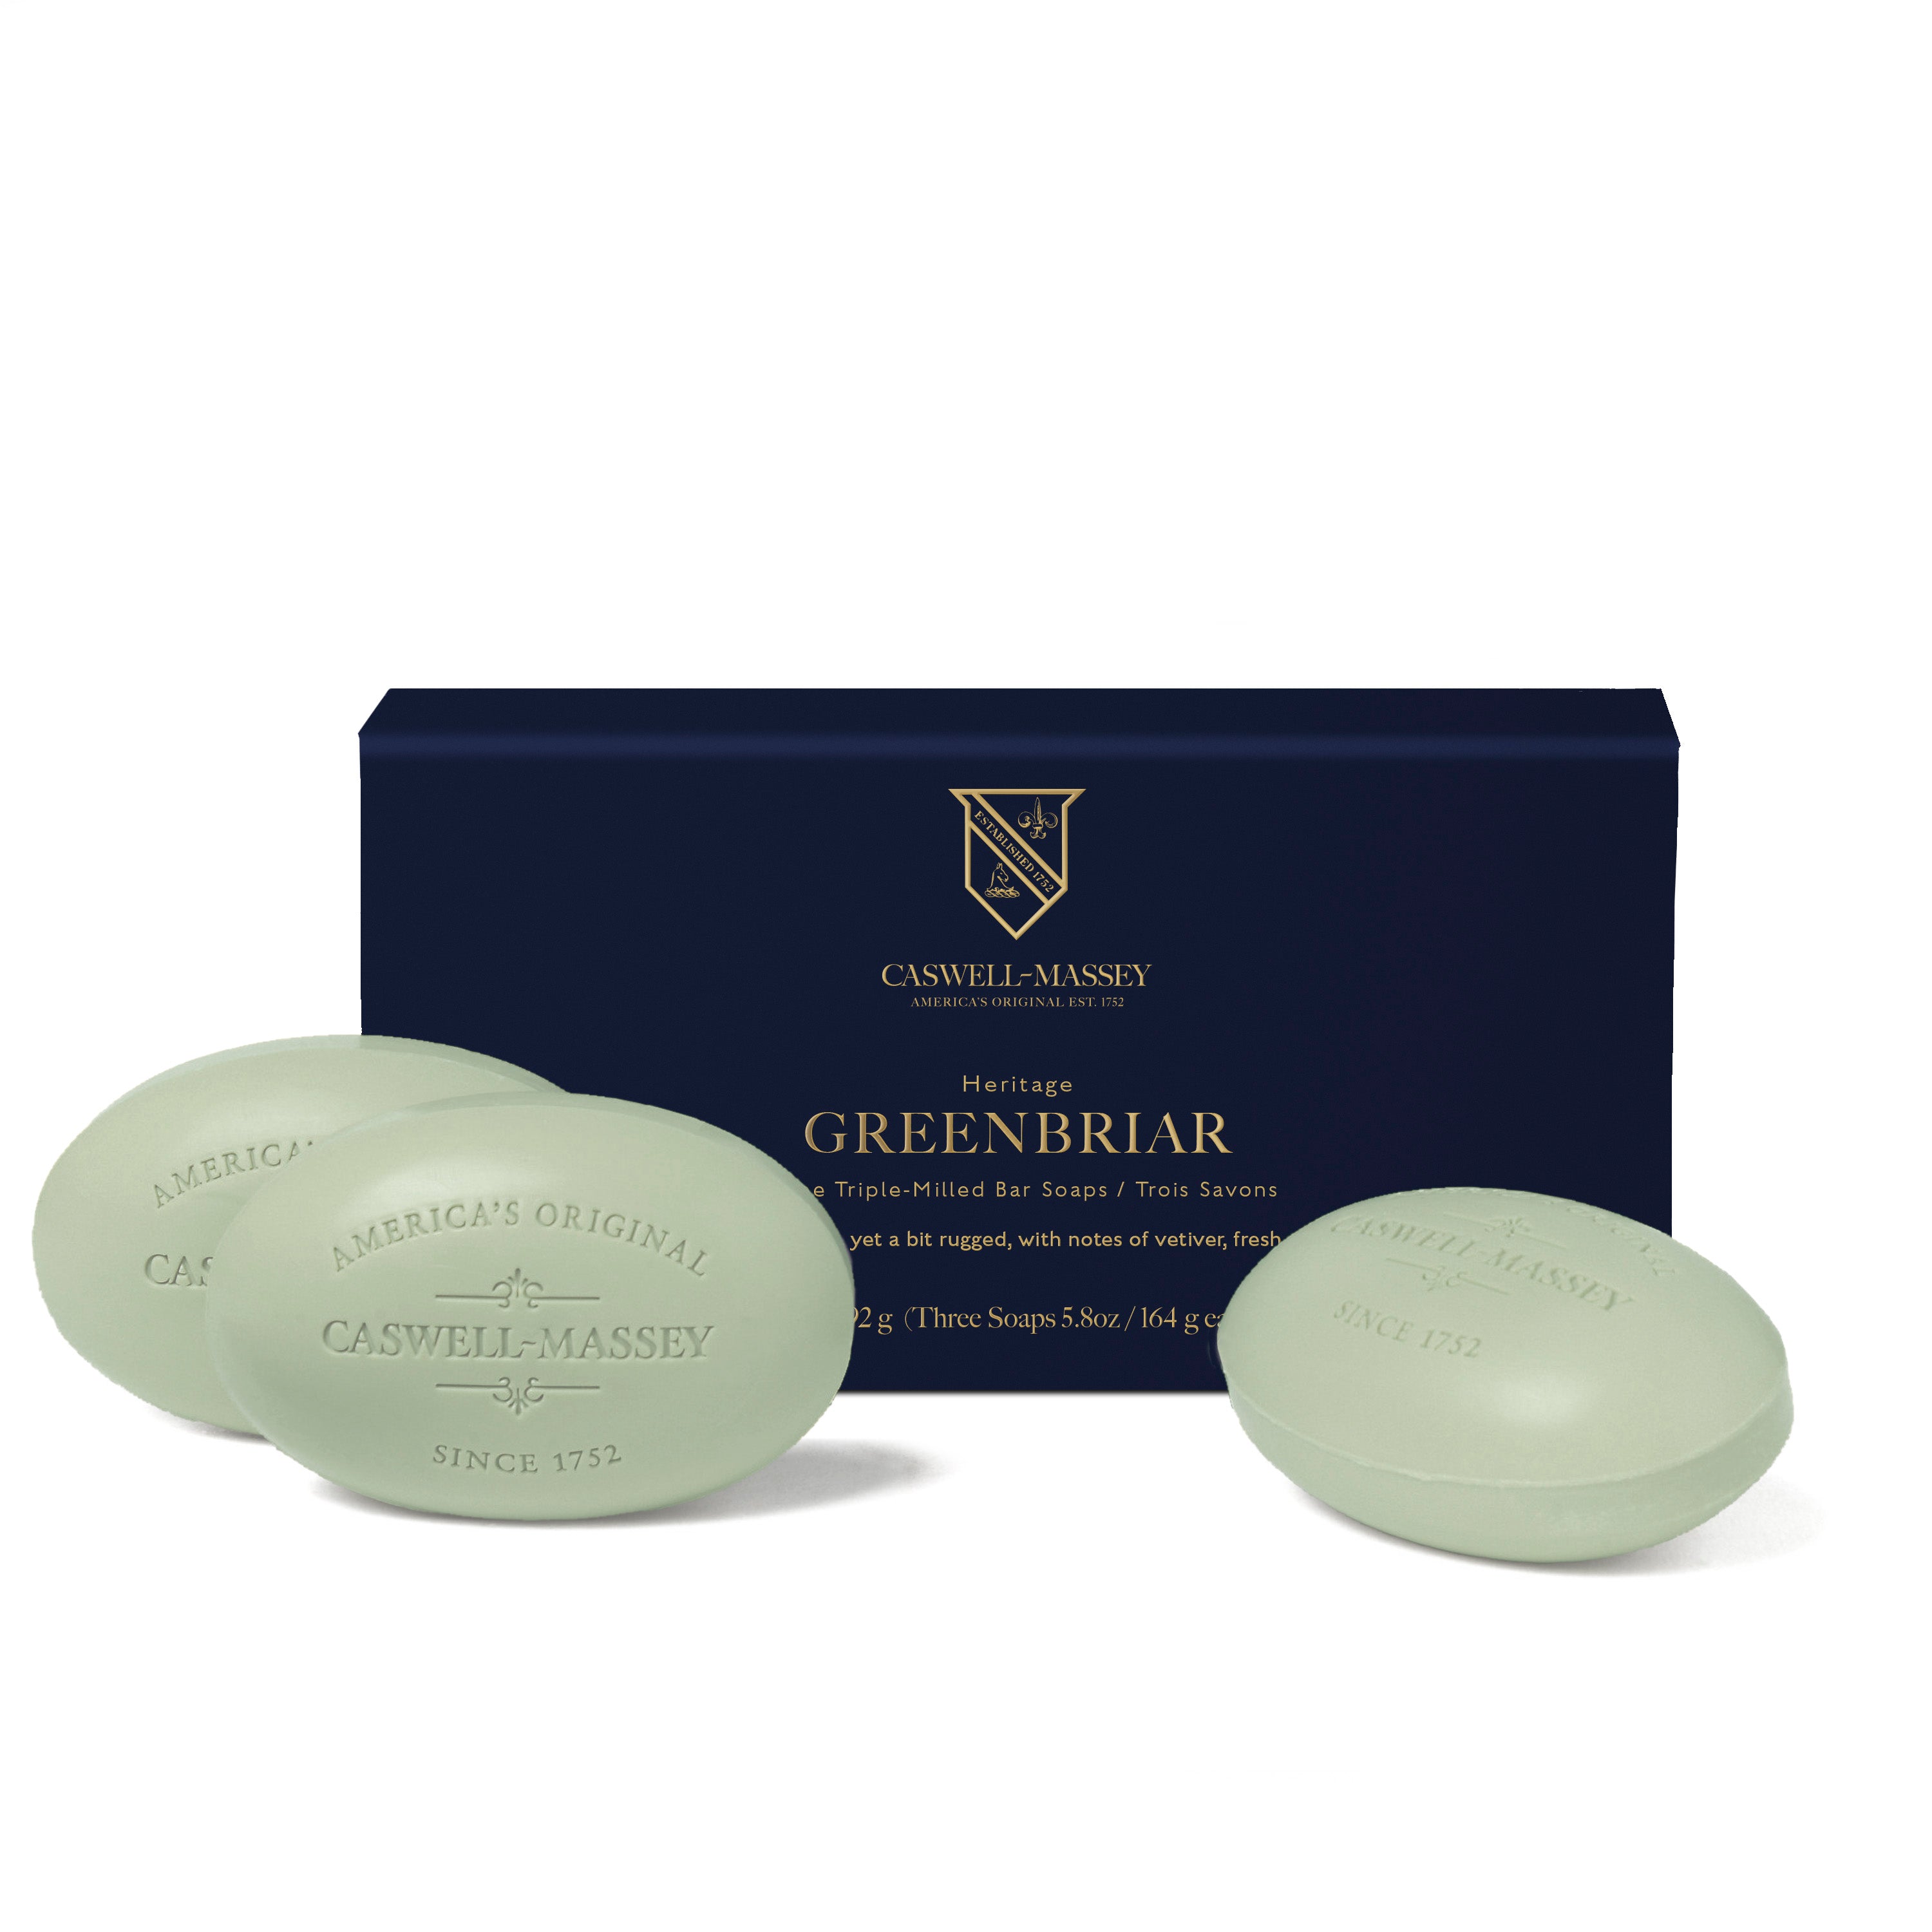 Caswell-Massey® Heritage Greenbriar 3-Soap Set shown with navy blue gift box alongside green bars of soap